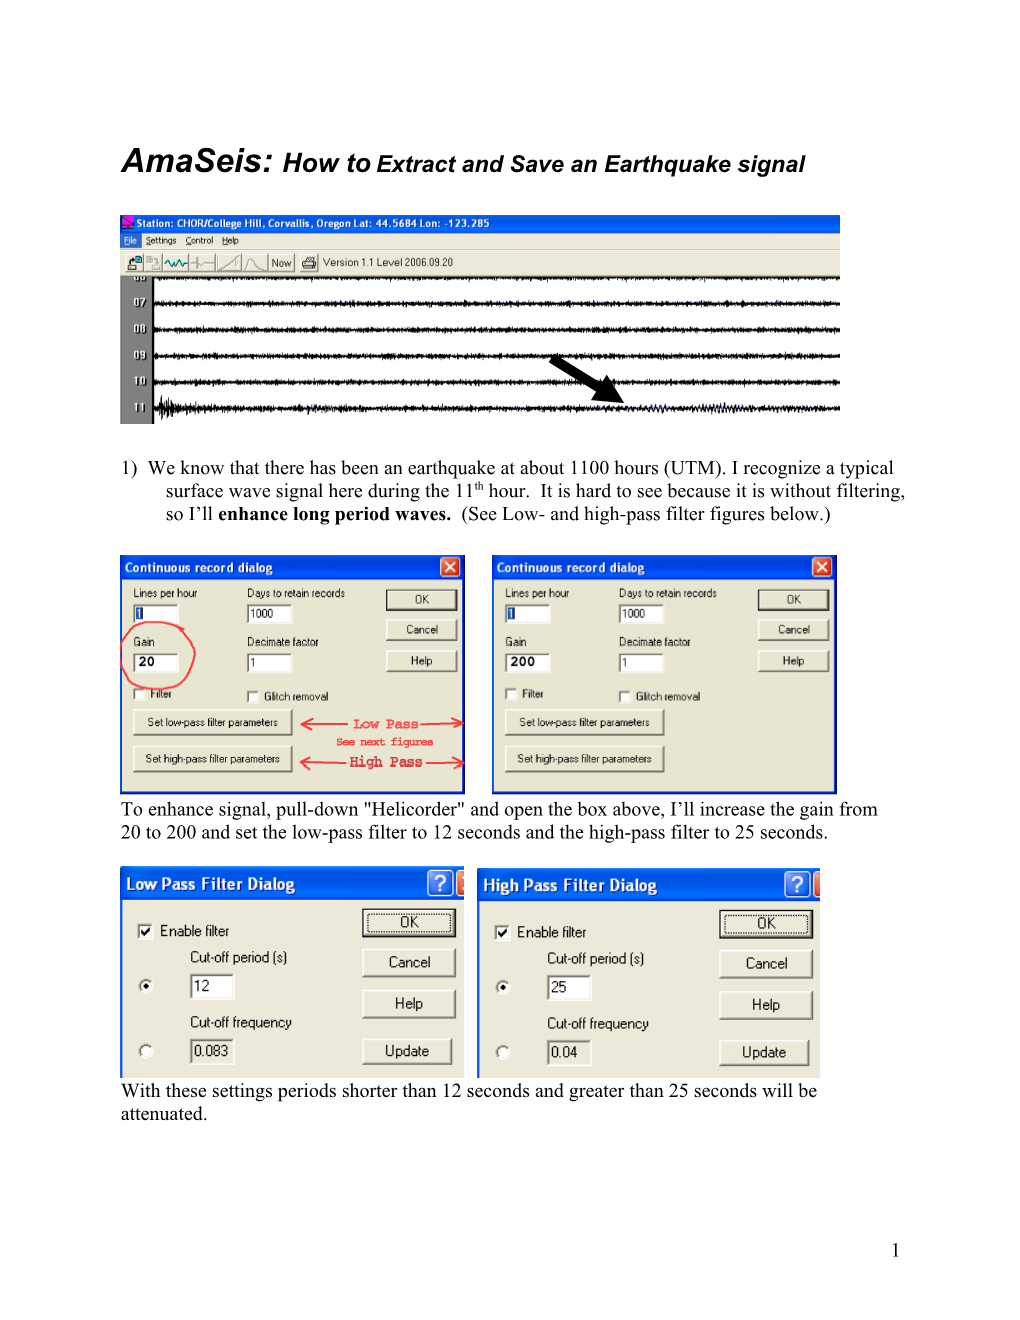 Amaseis Notes: Extracting and Saving an Earthquake